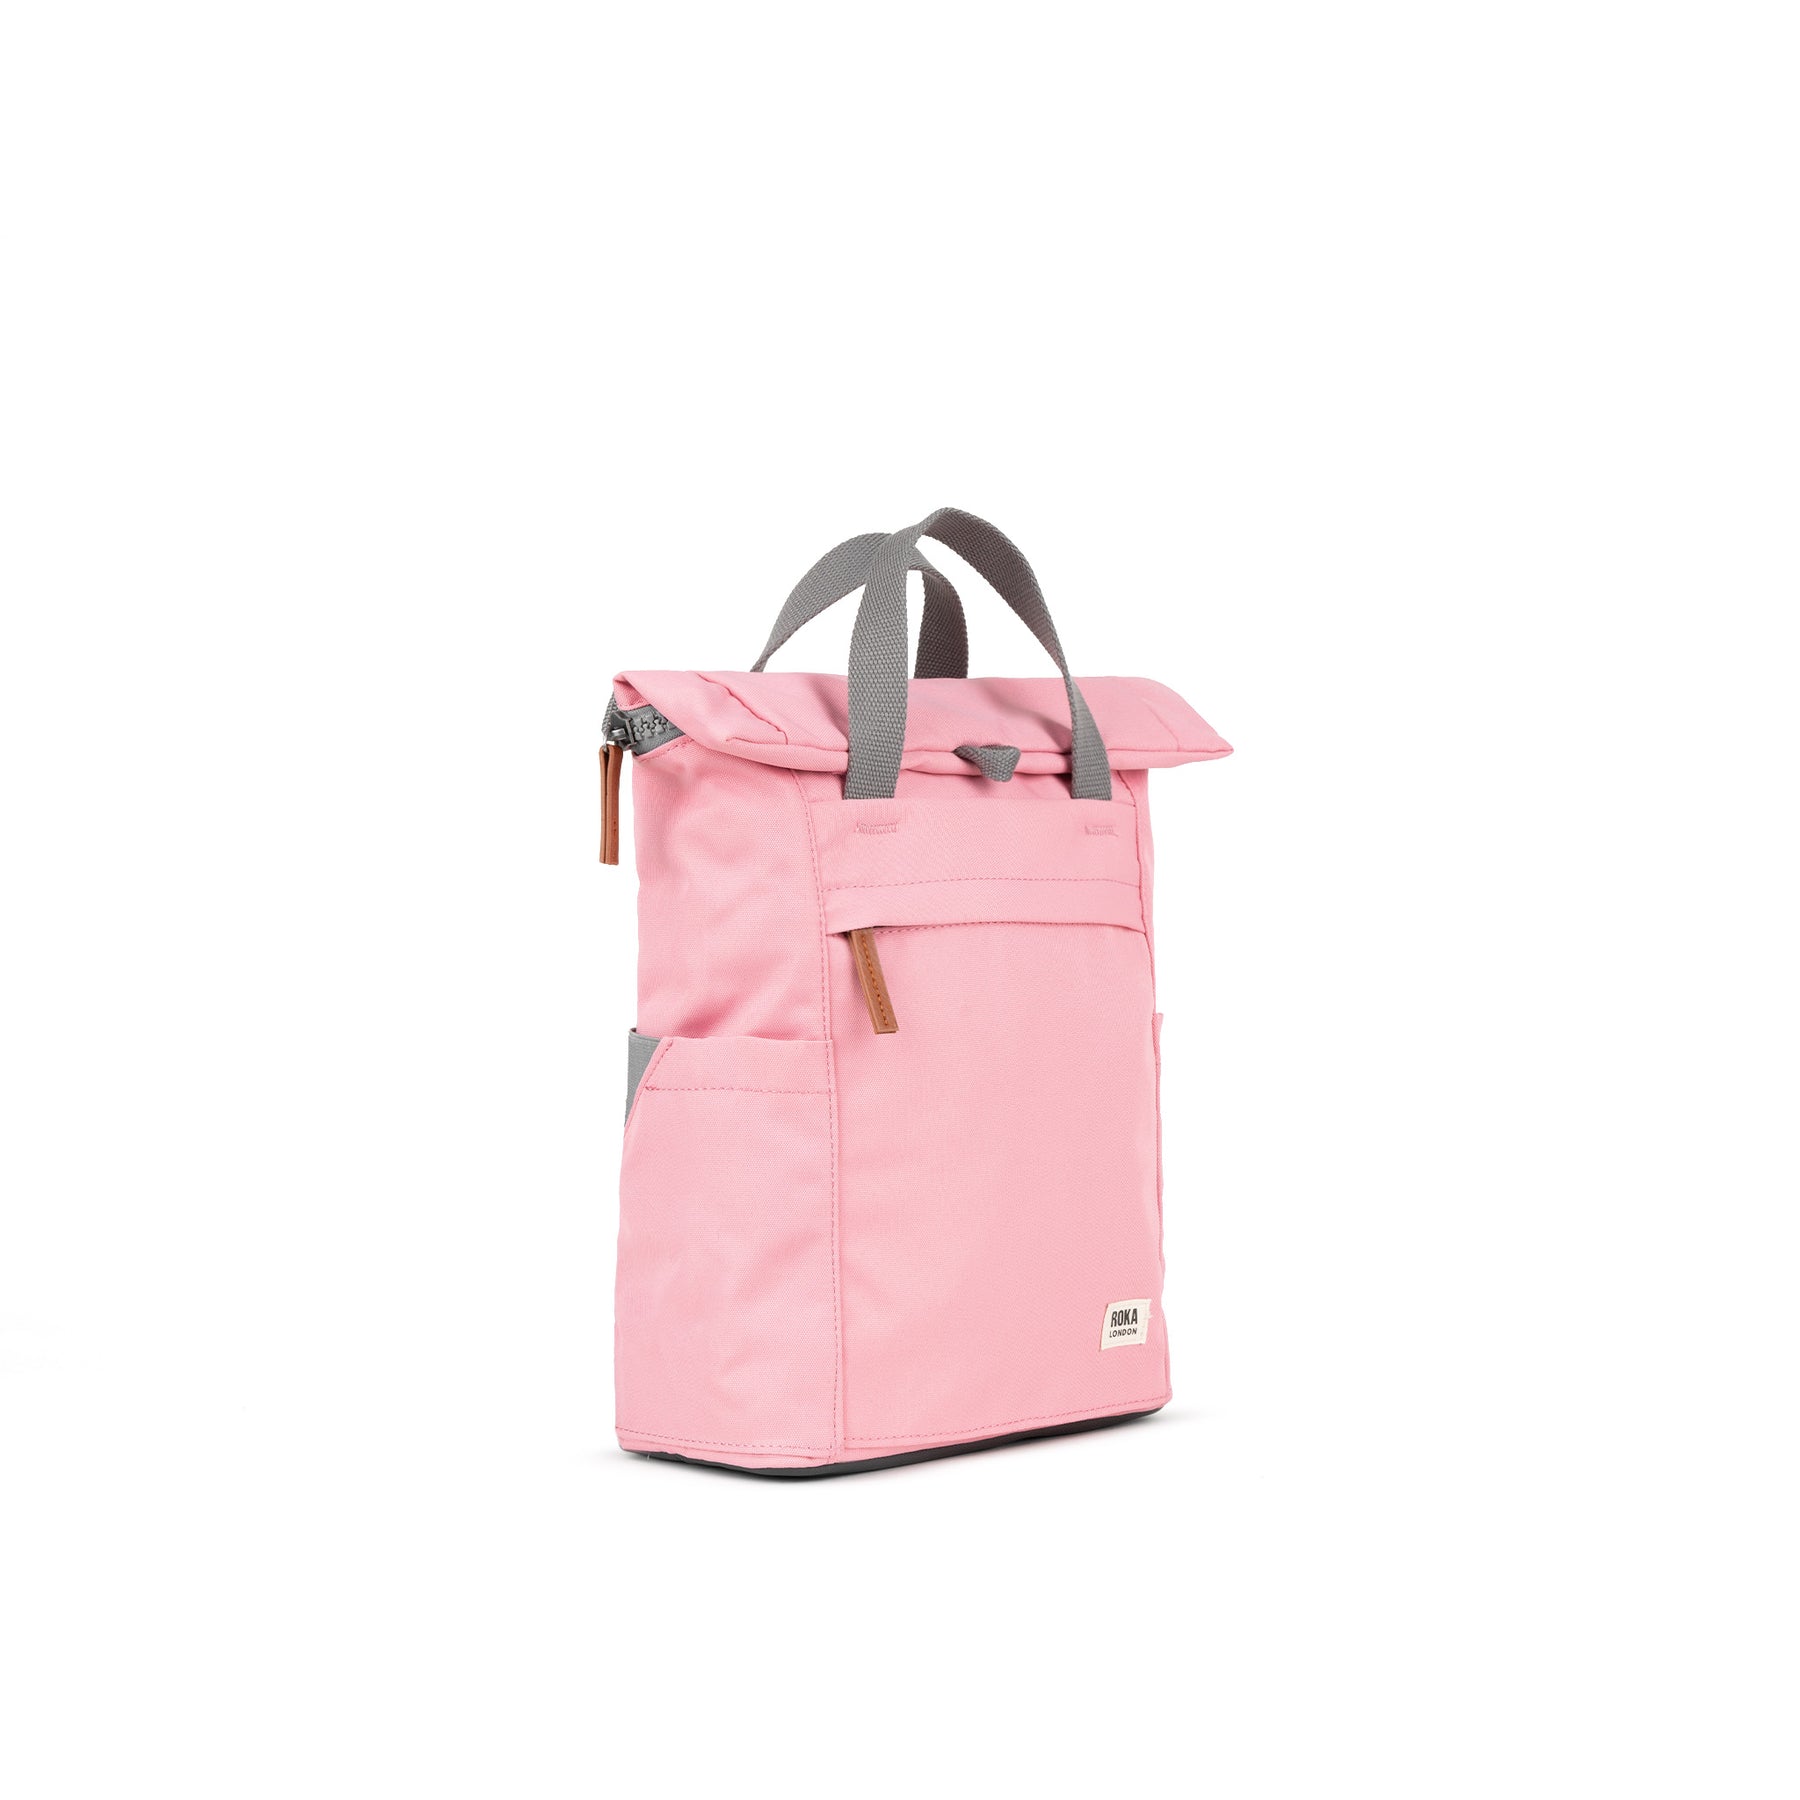 ROKA Finchley A Rose Small Recycled Canvas Bag